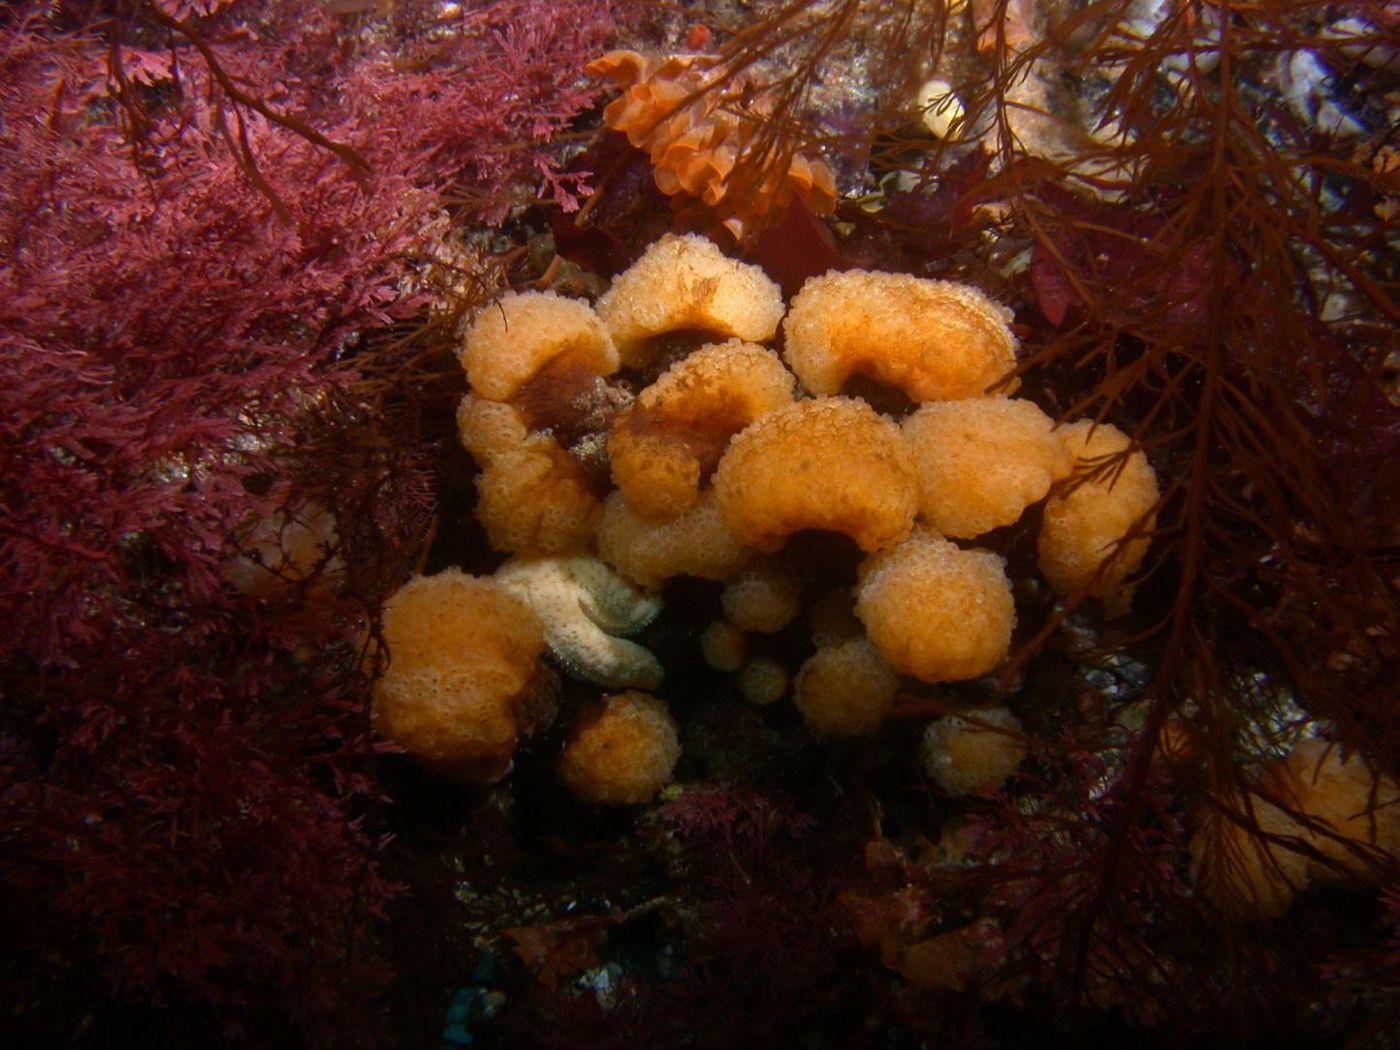 The Antarctic sea squirt Synoicum adareanum at 80 feet, among red algae and starfish on the seafloor. / Credit: Bill Baker, USF